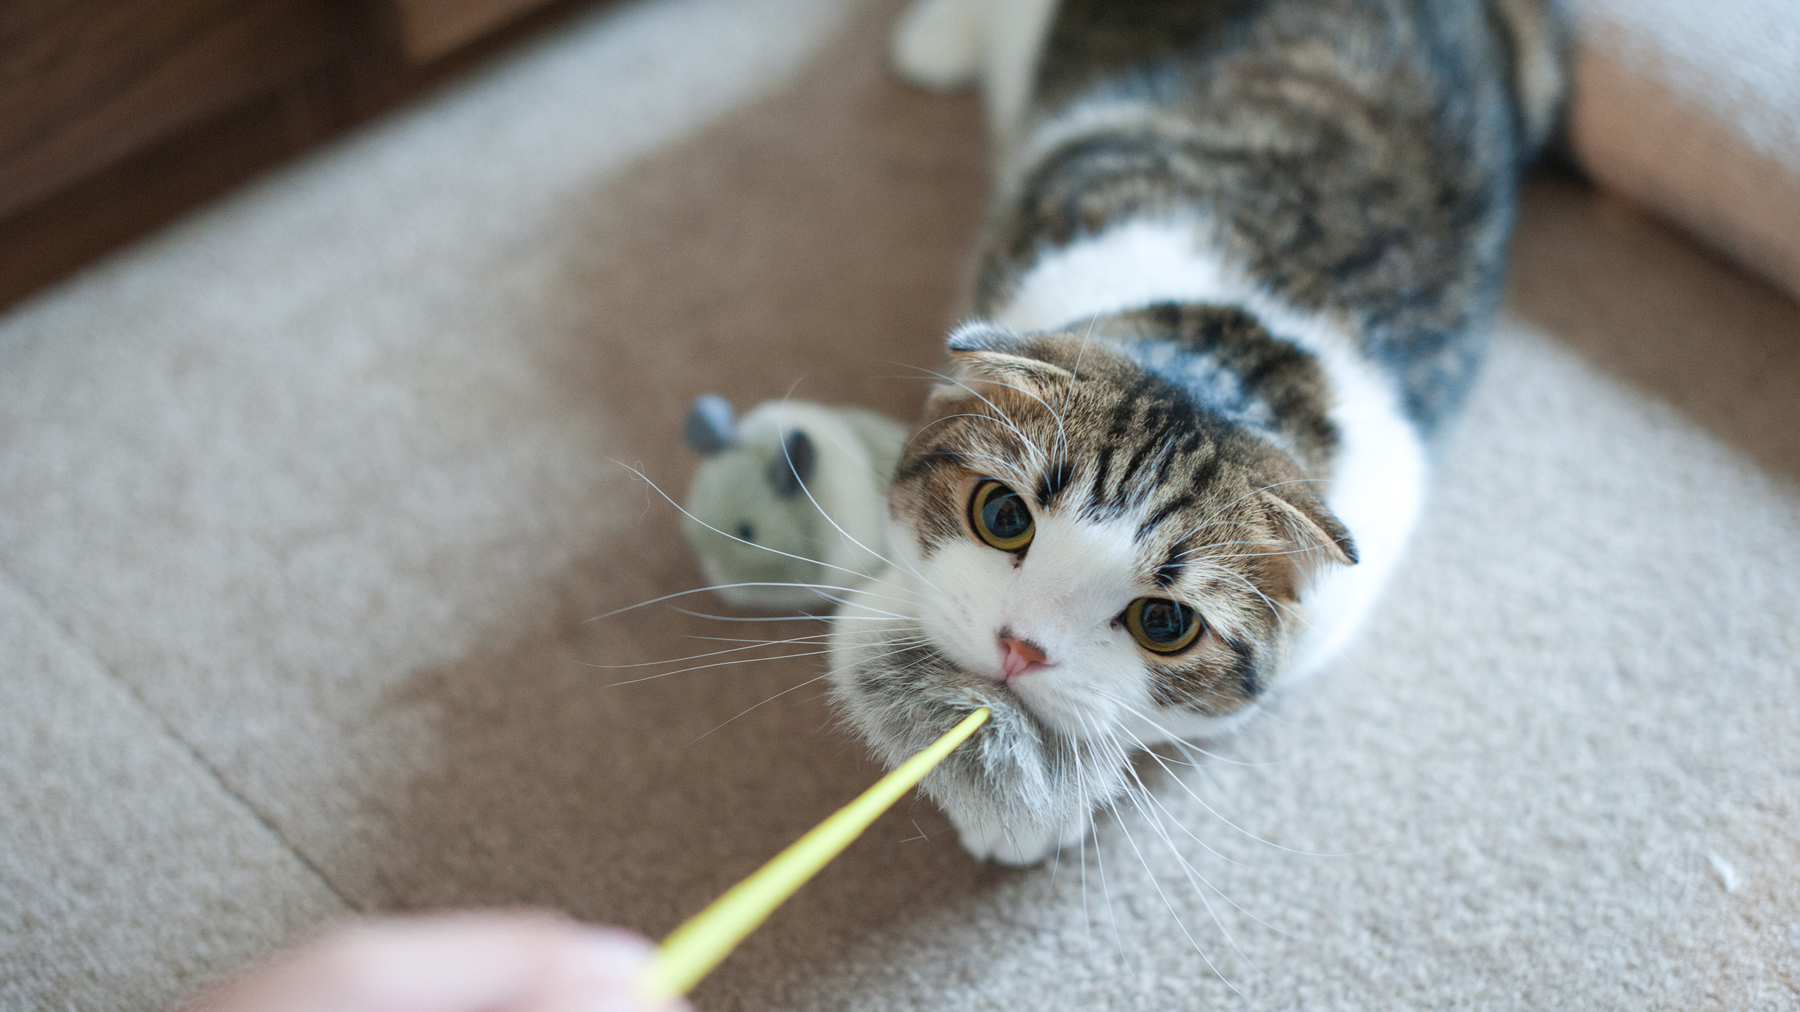 Cat trainer shares how to keep your cat happy and mentally stimulated with a simple game